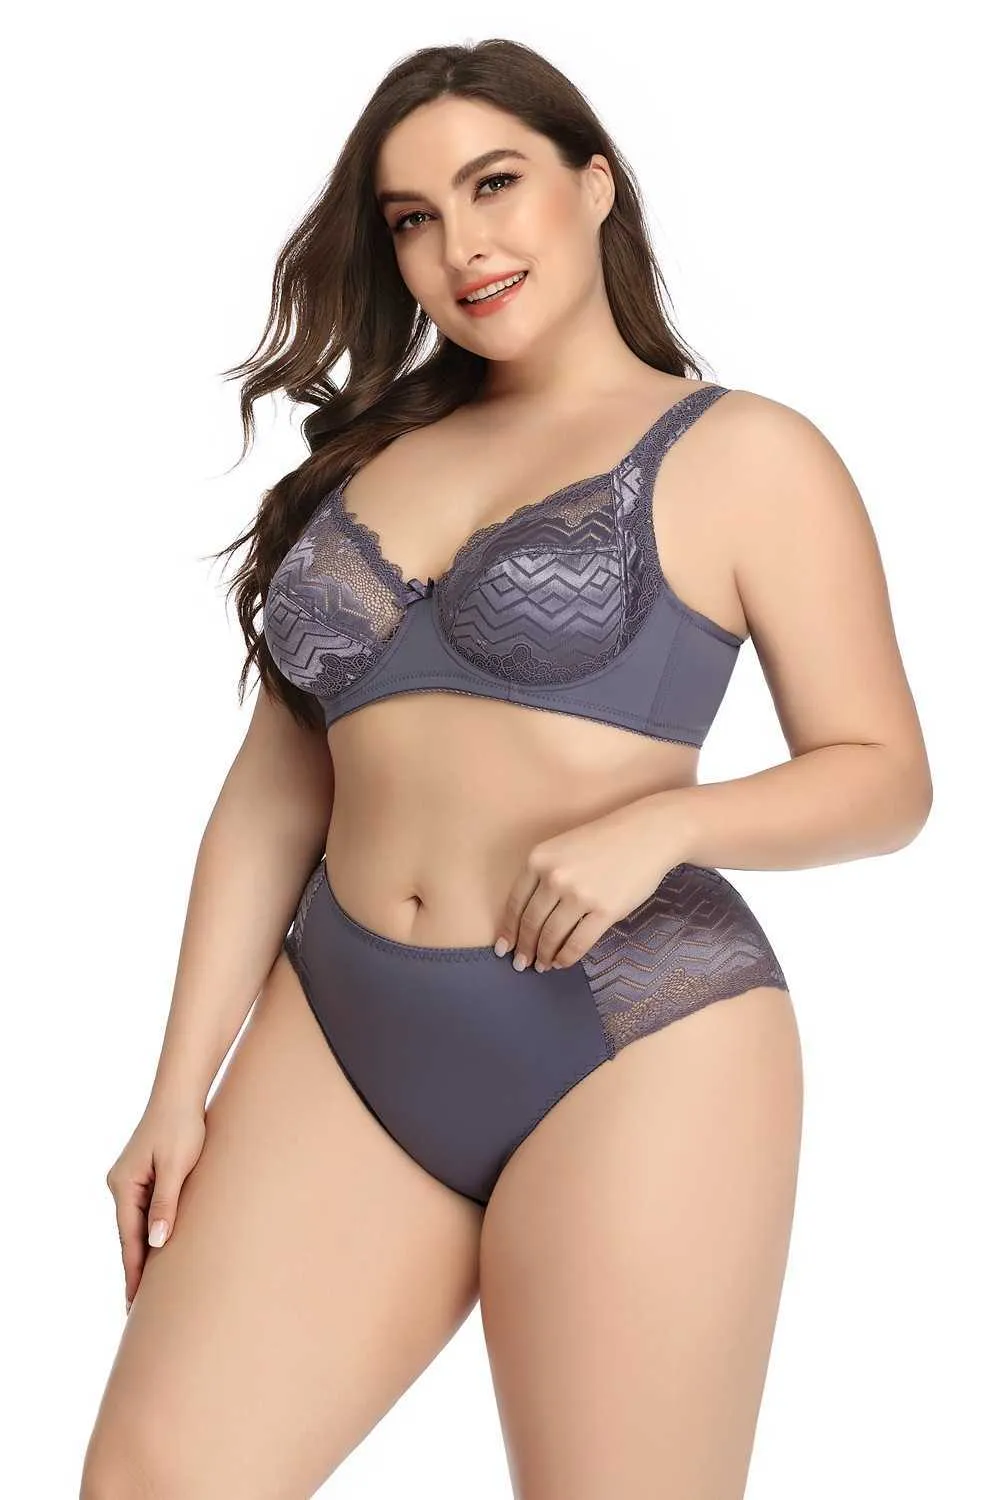 Matching Bra and Panty Sets for Women Plus Size Lingerie Set for